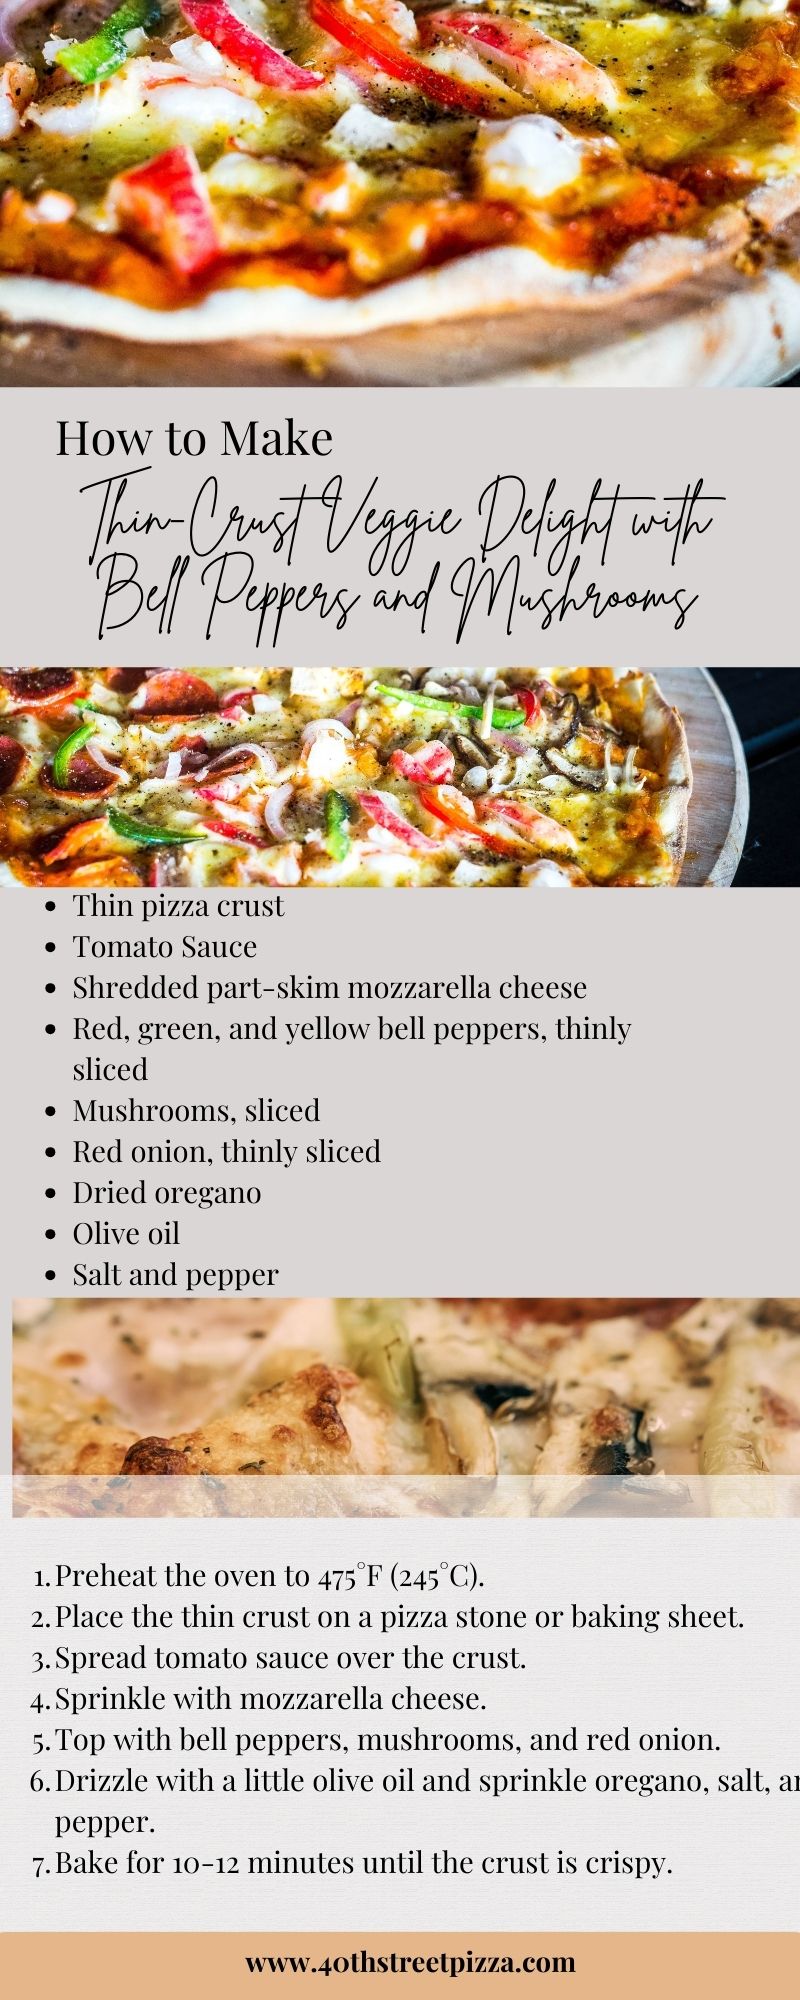 Thin-Crust Veggie Delight with Bell Peppers and Mushrooms infographic